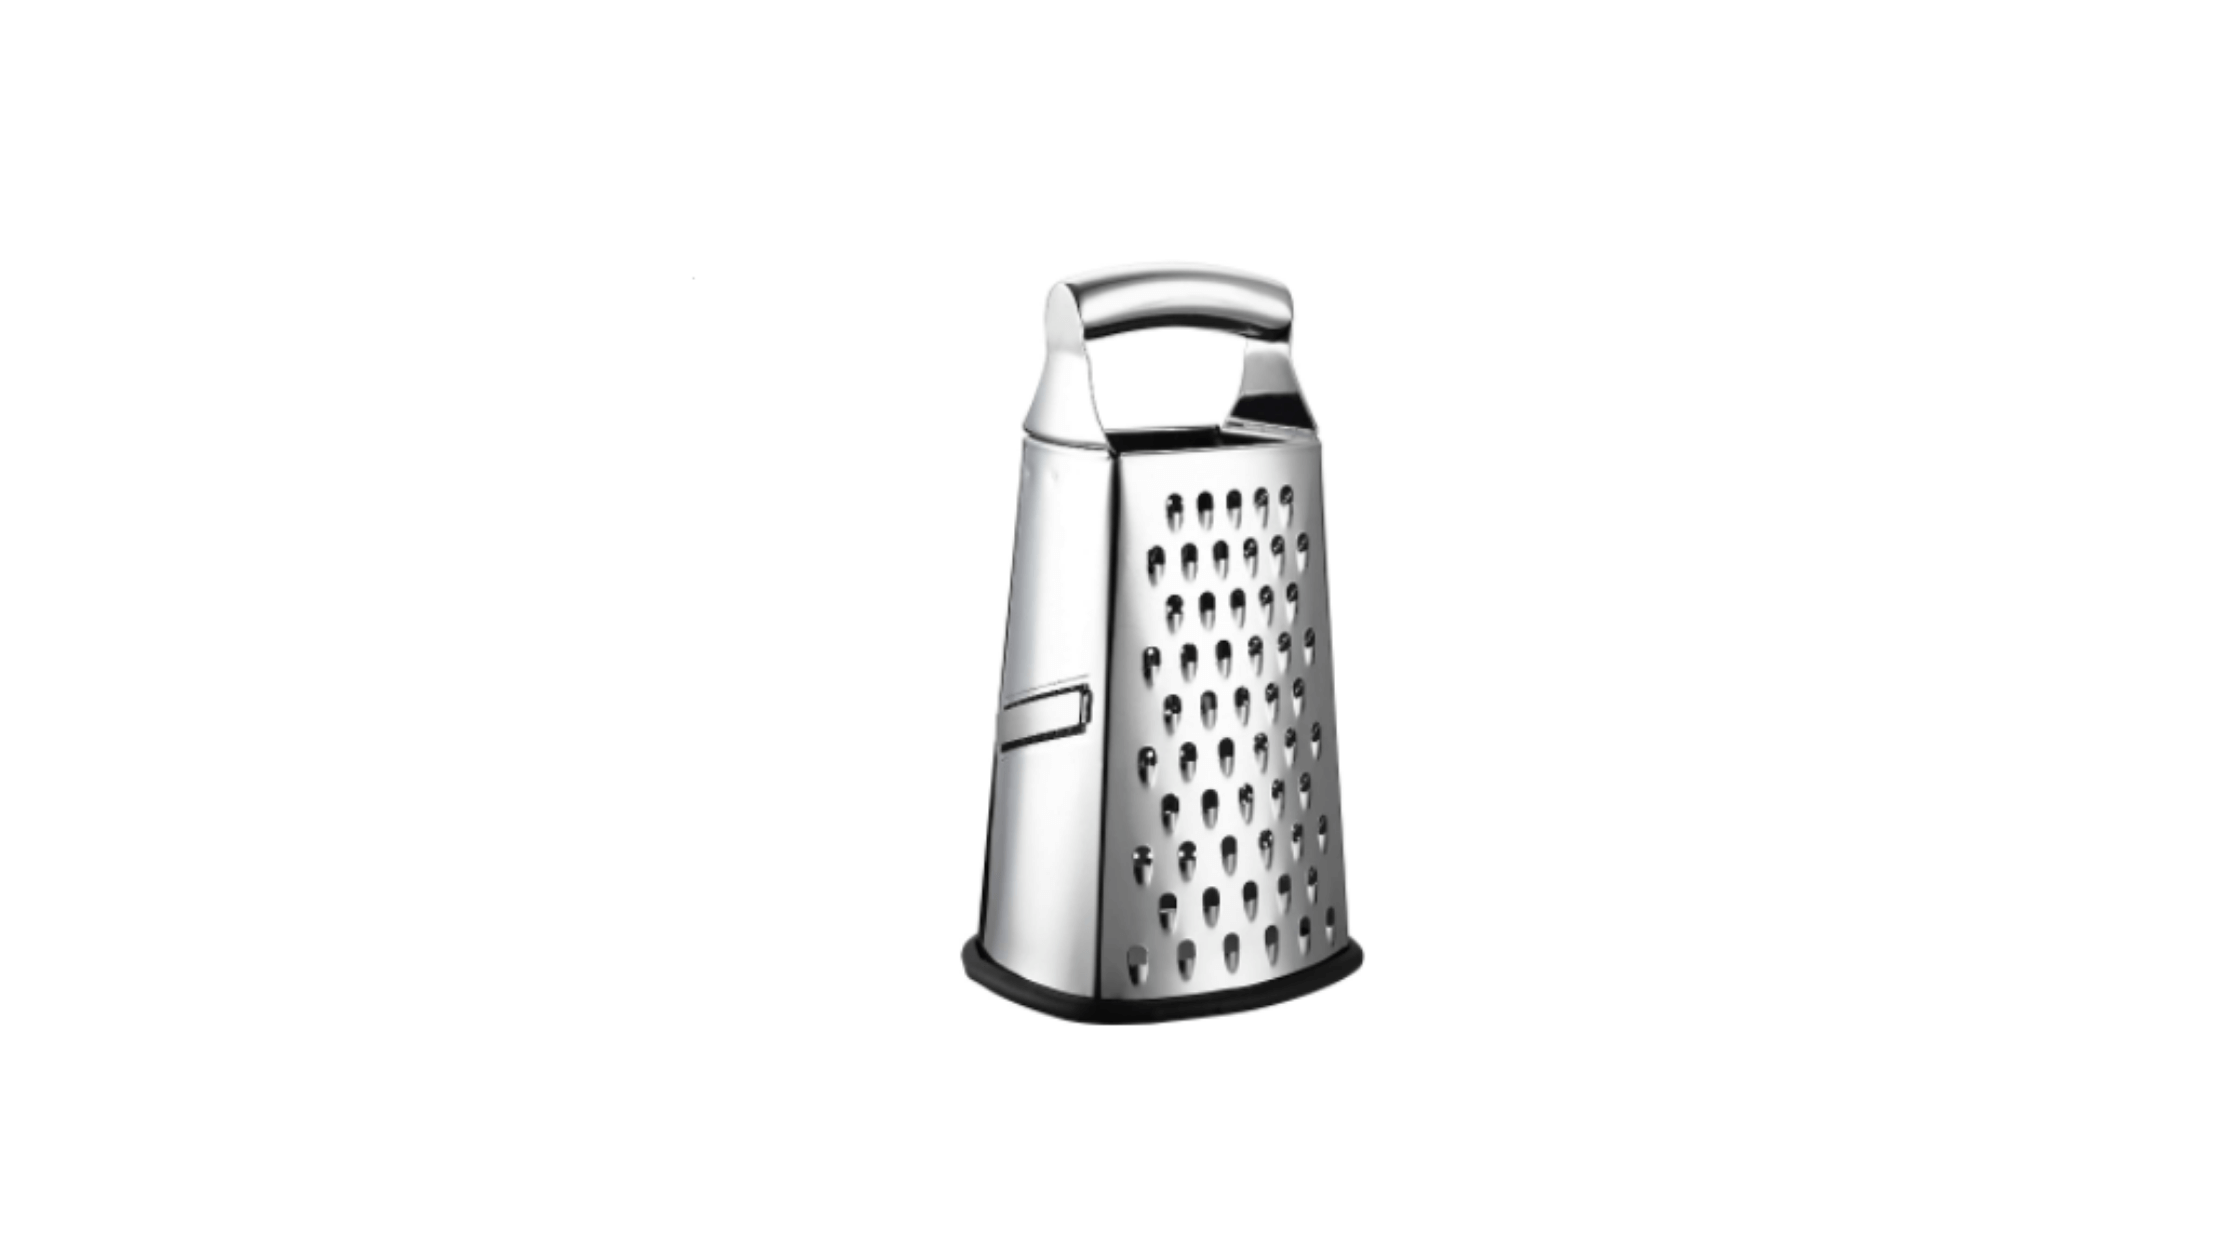 Spring Chef Box Grater